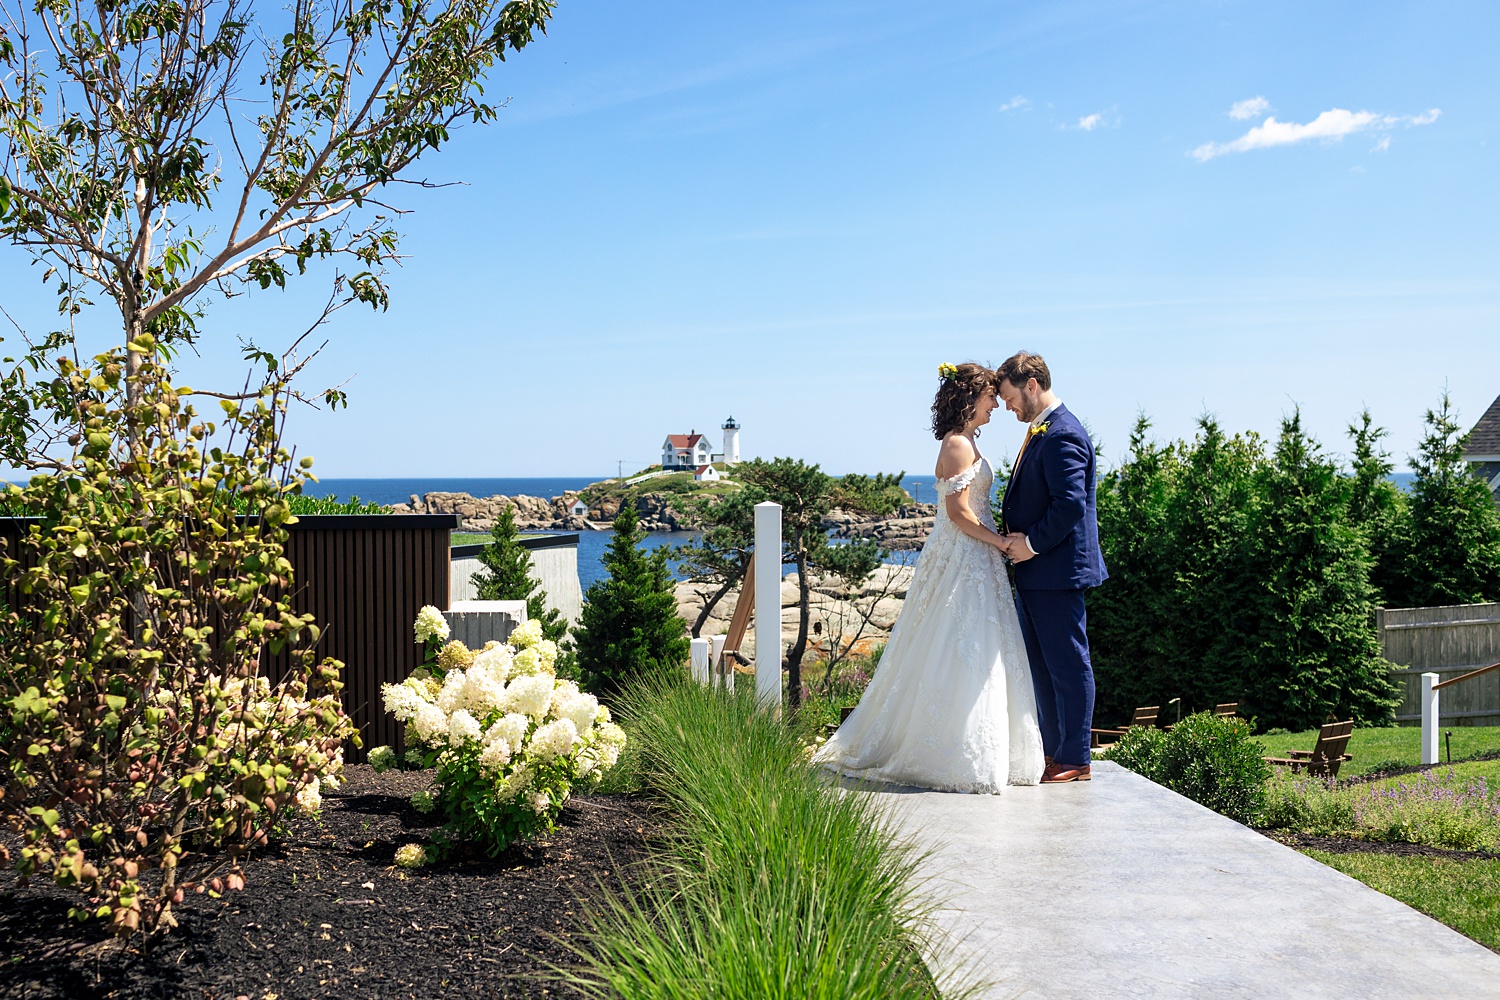 The newly married couple get close together at a view of the Nubble Lighthouse in York Maine